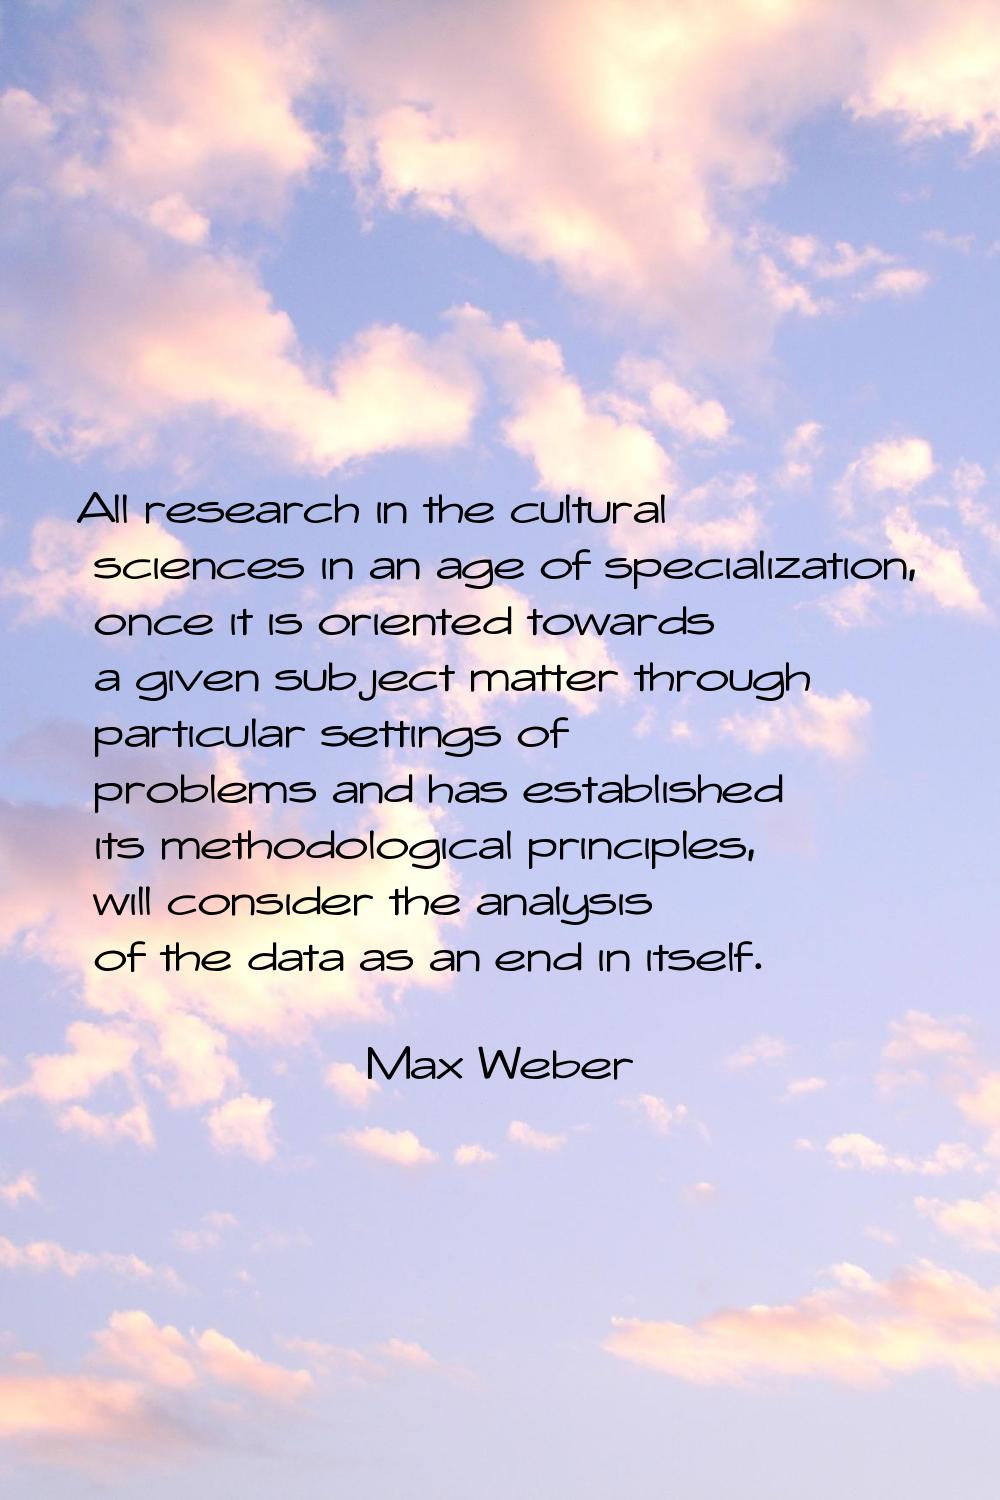 All research in the cultural sciences in an age of specialization, once it is oriented towards a gi